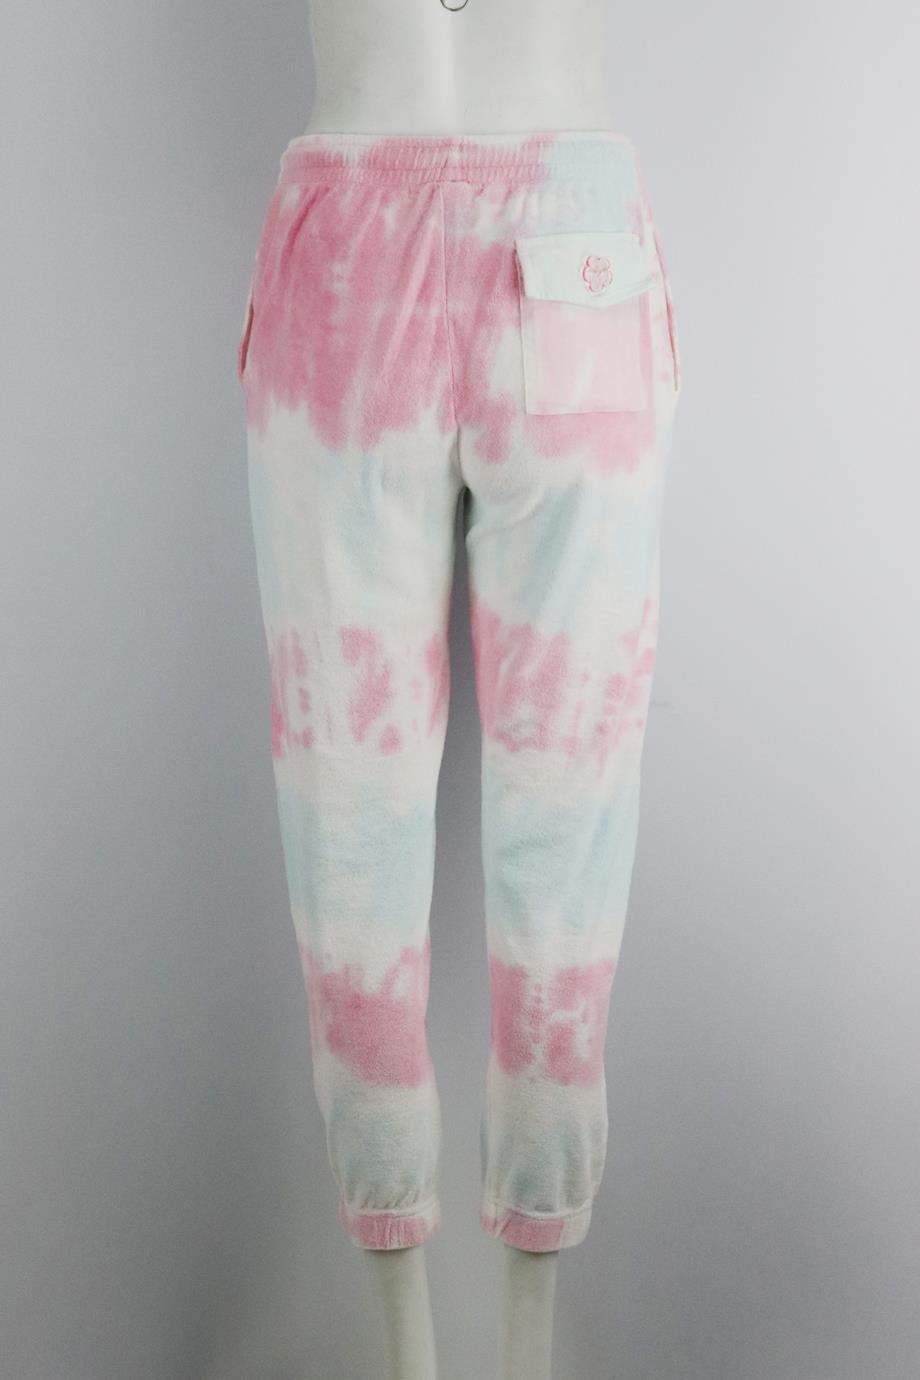 LOVESHACKFANCY TIE DYED COTTON TERRY TRACK PANTS SMALL